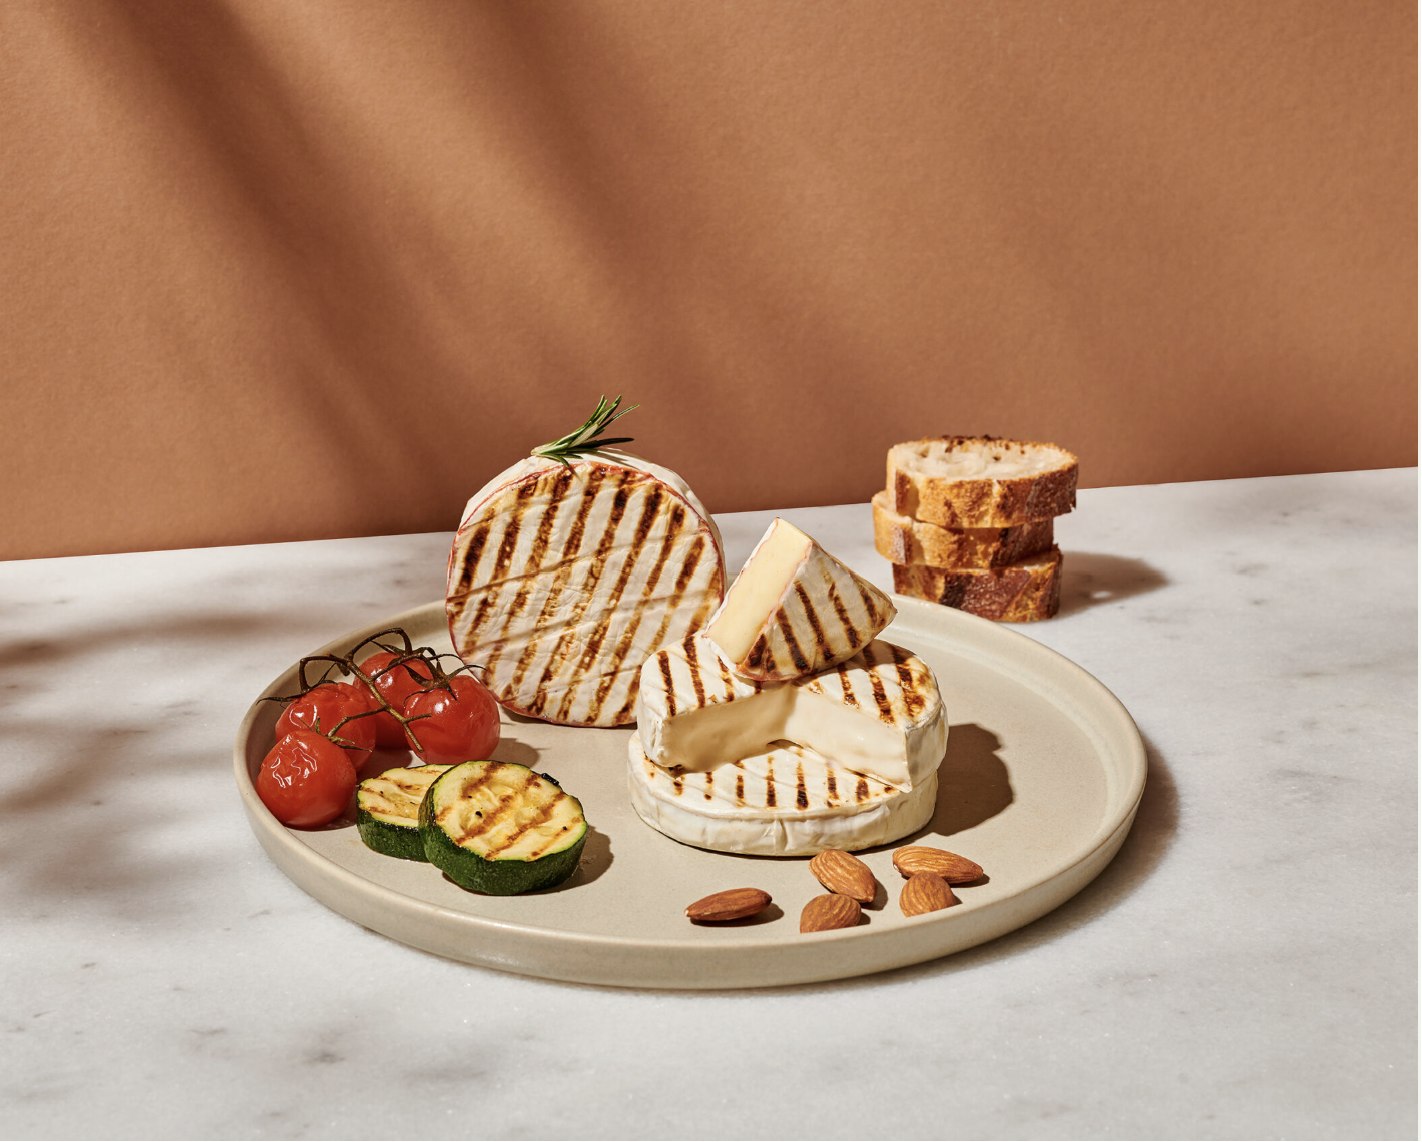 Mondarella Grill Rouge The delicately spicy version of our Camembert alternative for the grill. Fine melting meets roasted aromas. Perfect with grilled vegetables or fresh salad.

100% plant-based and made from natural ingredients.